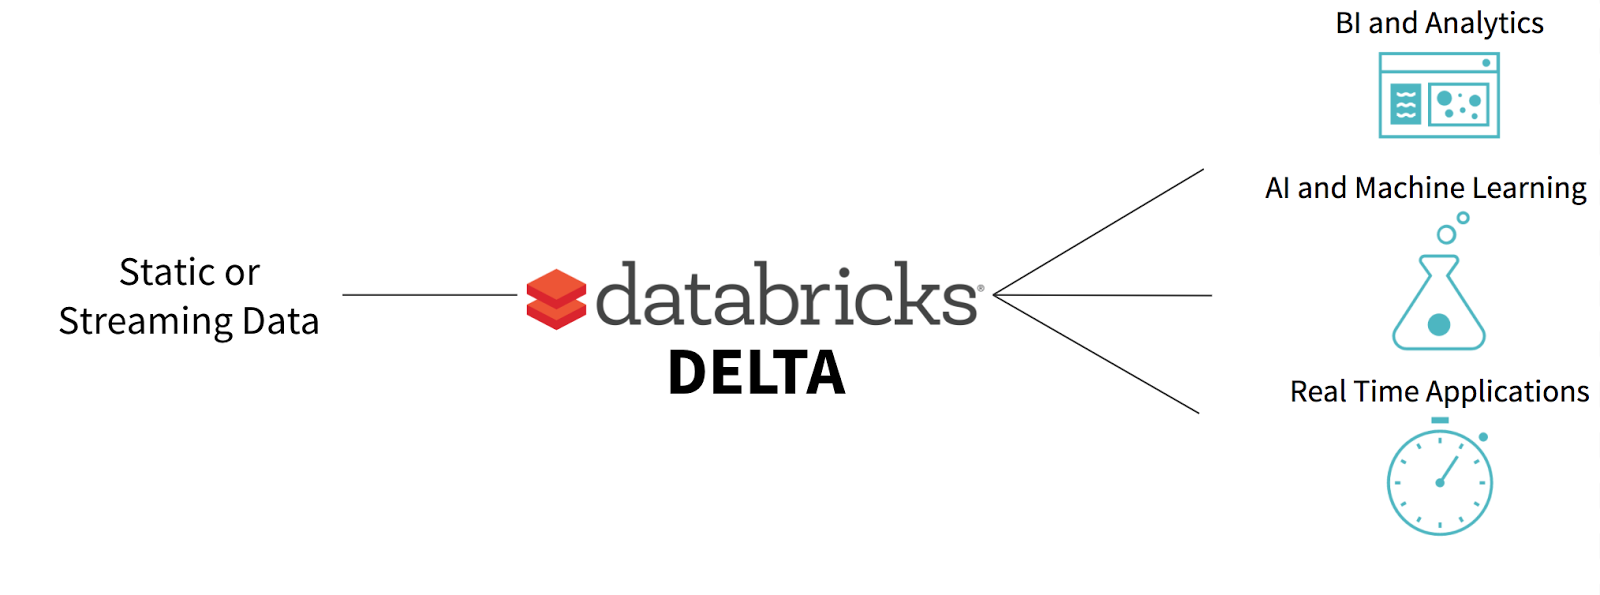 A Unified Data Management System for Real-time Big Data. Image credits Databricks.